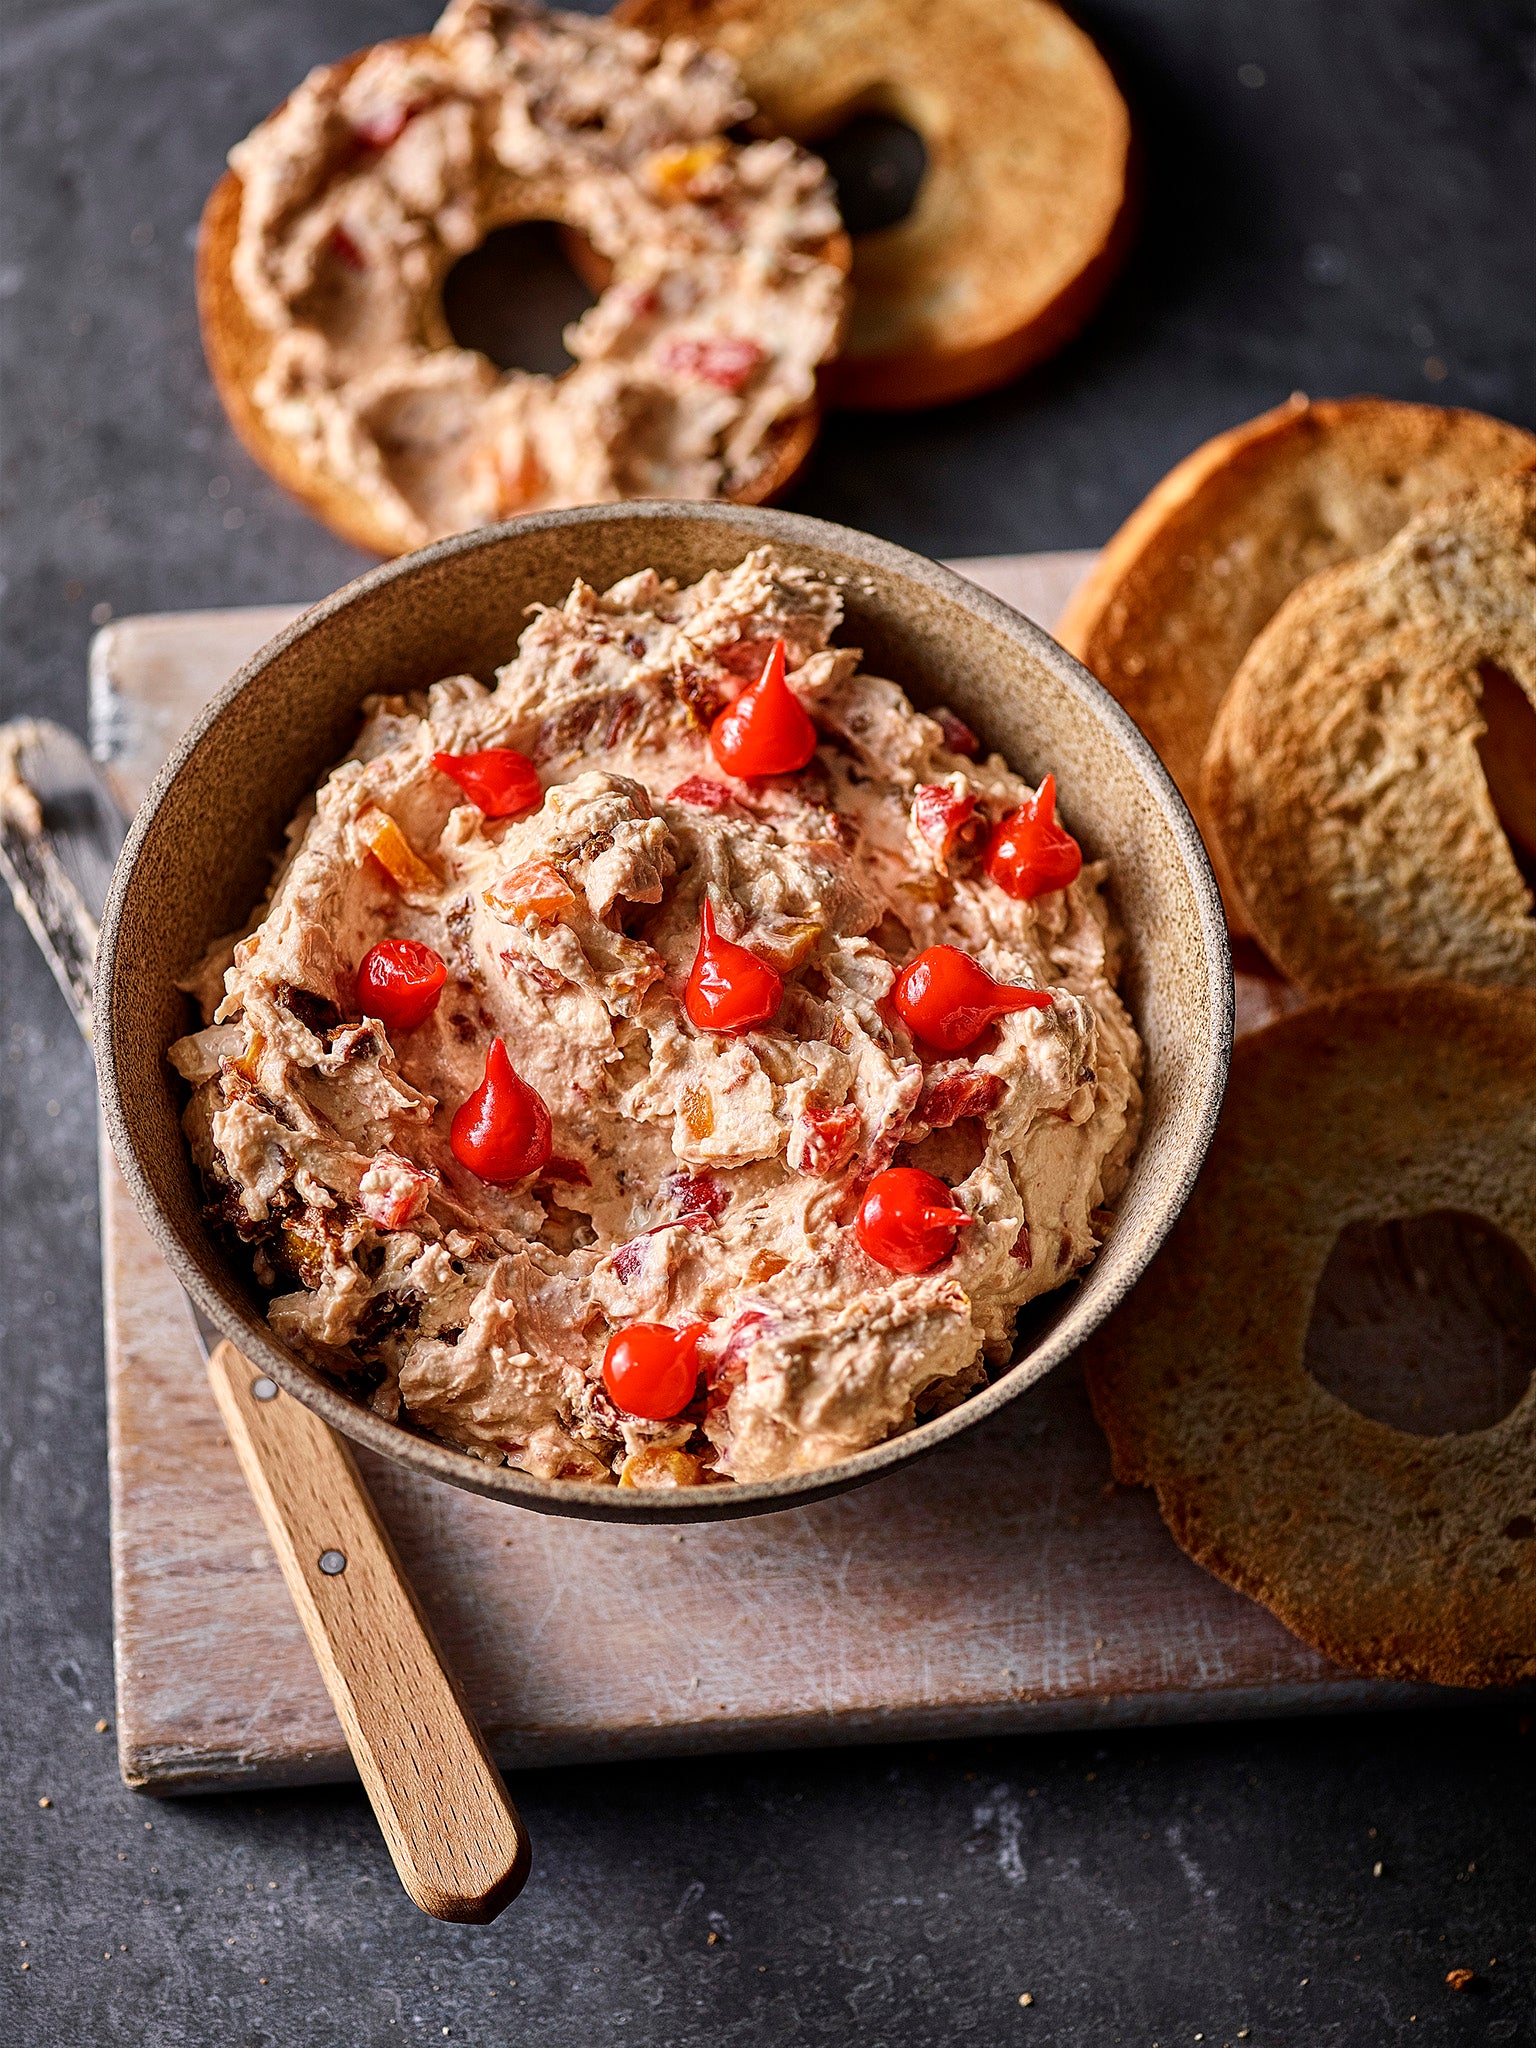 This dip is perfect with crisps or spread on toast